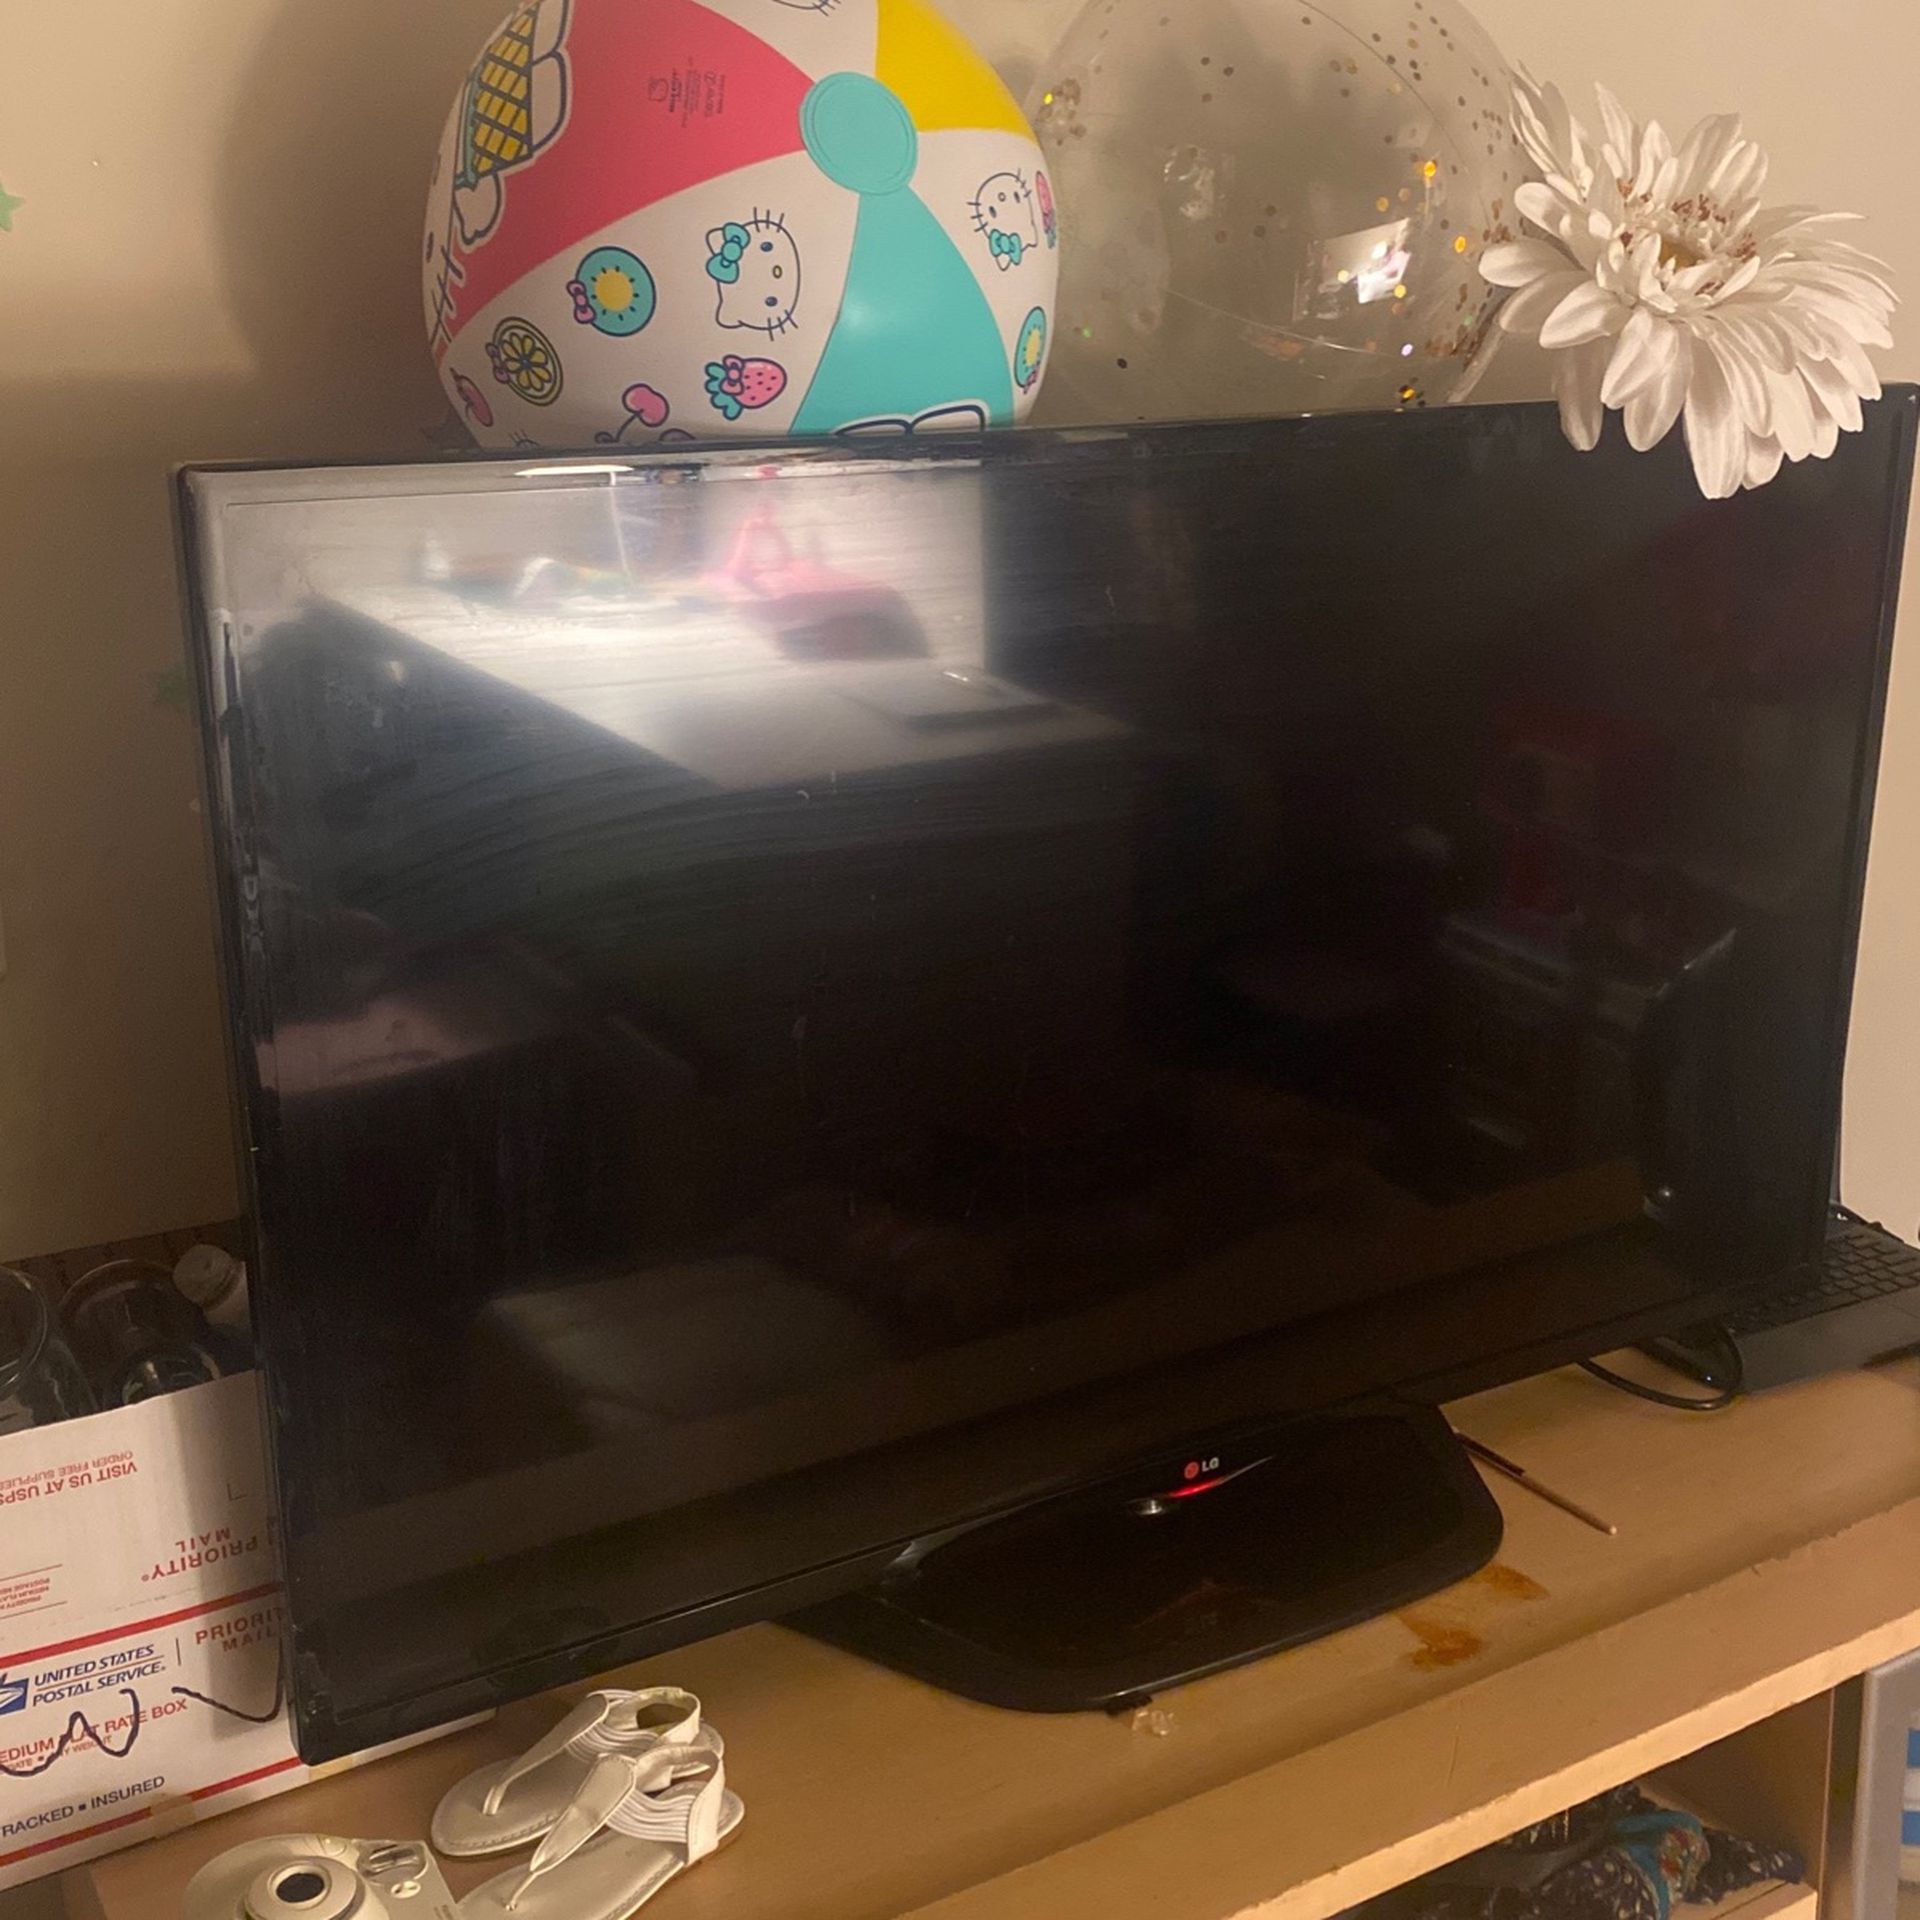 42 Inch LG Tv not A Smart Tv But Has All The Ports To Hook Up A Laptop Or Any Other Devices To Stream No Issues With Tv $80